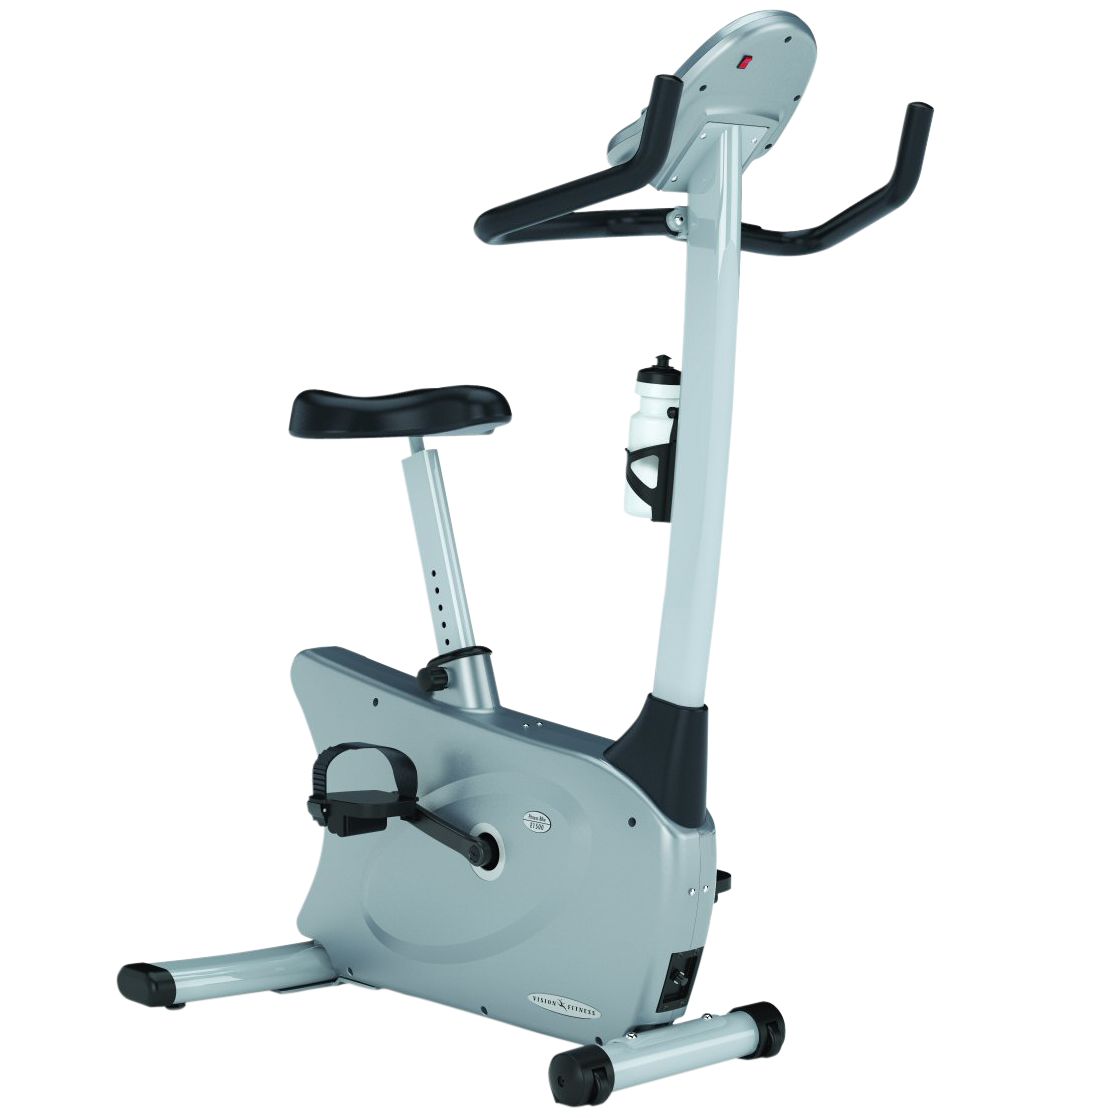 Vision Fitness E1500 Upright Exercise Bike with Premier Console at John Lewis